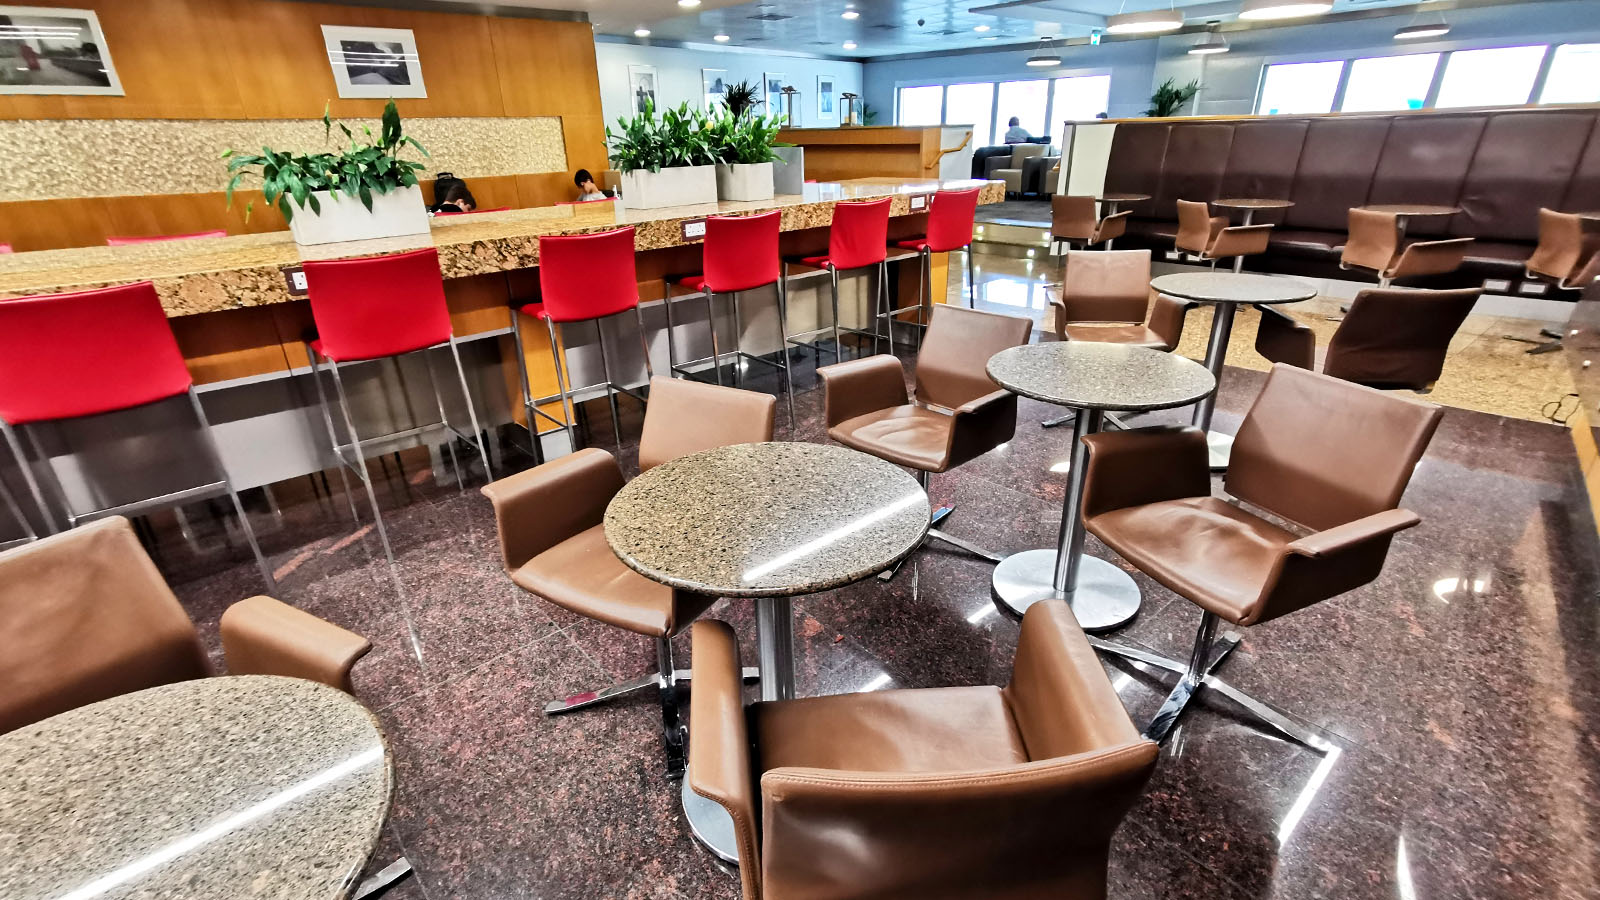 Main space in the American Airlines International First Class Lounge, London Heathrow